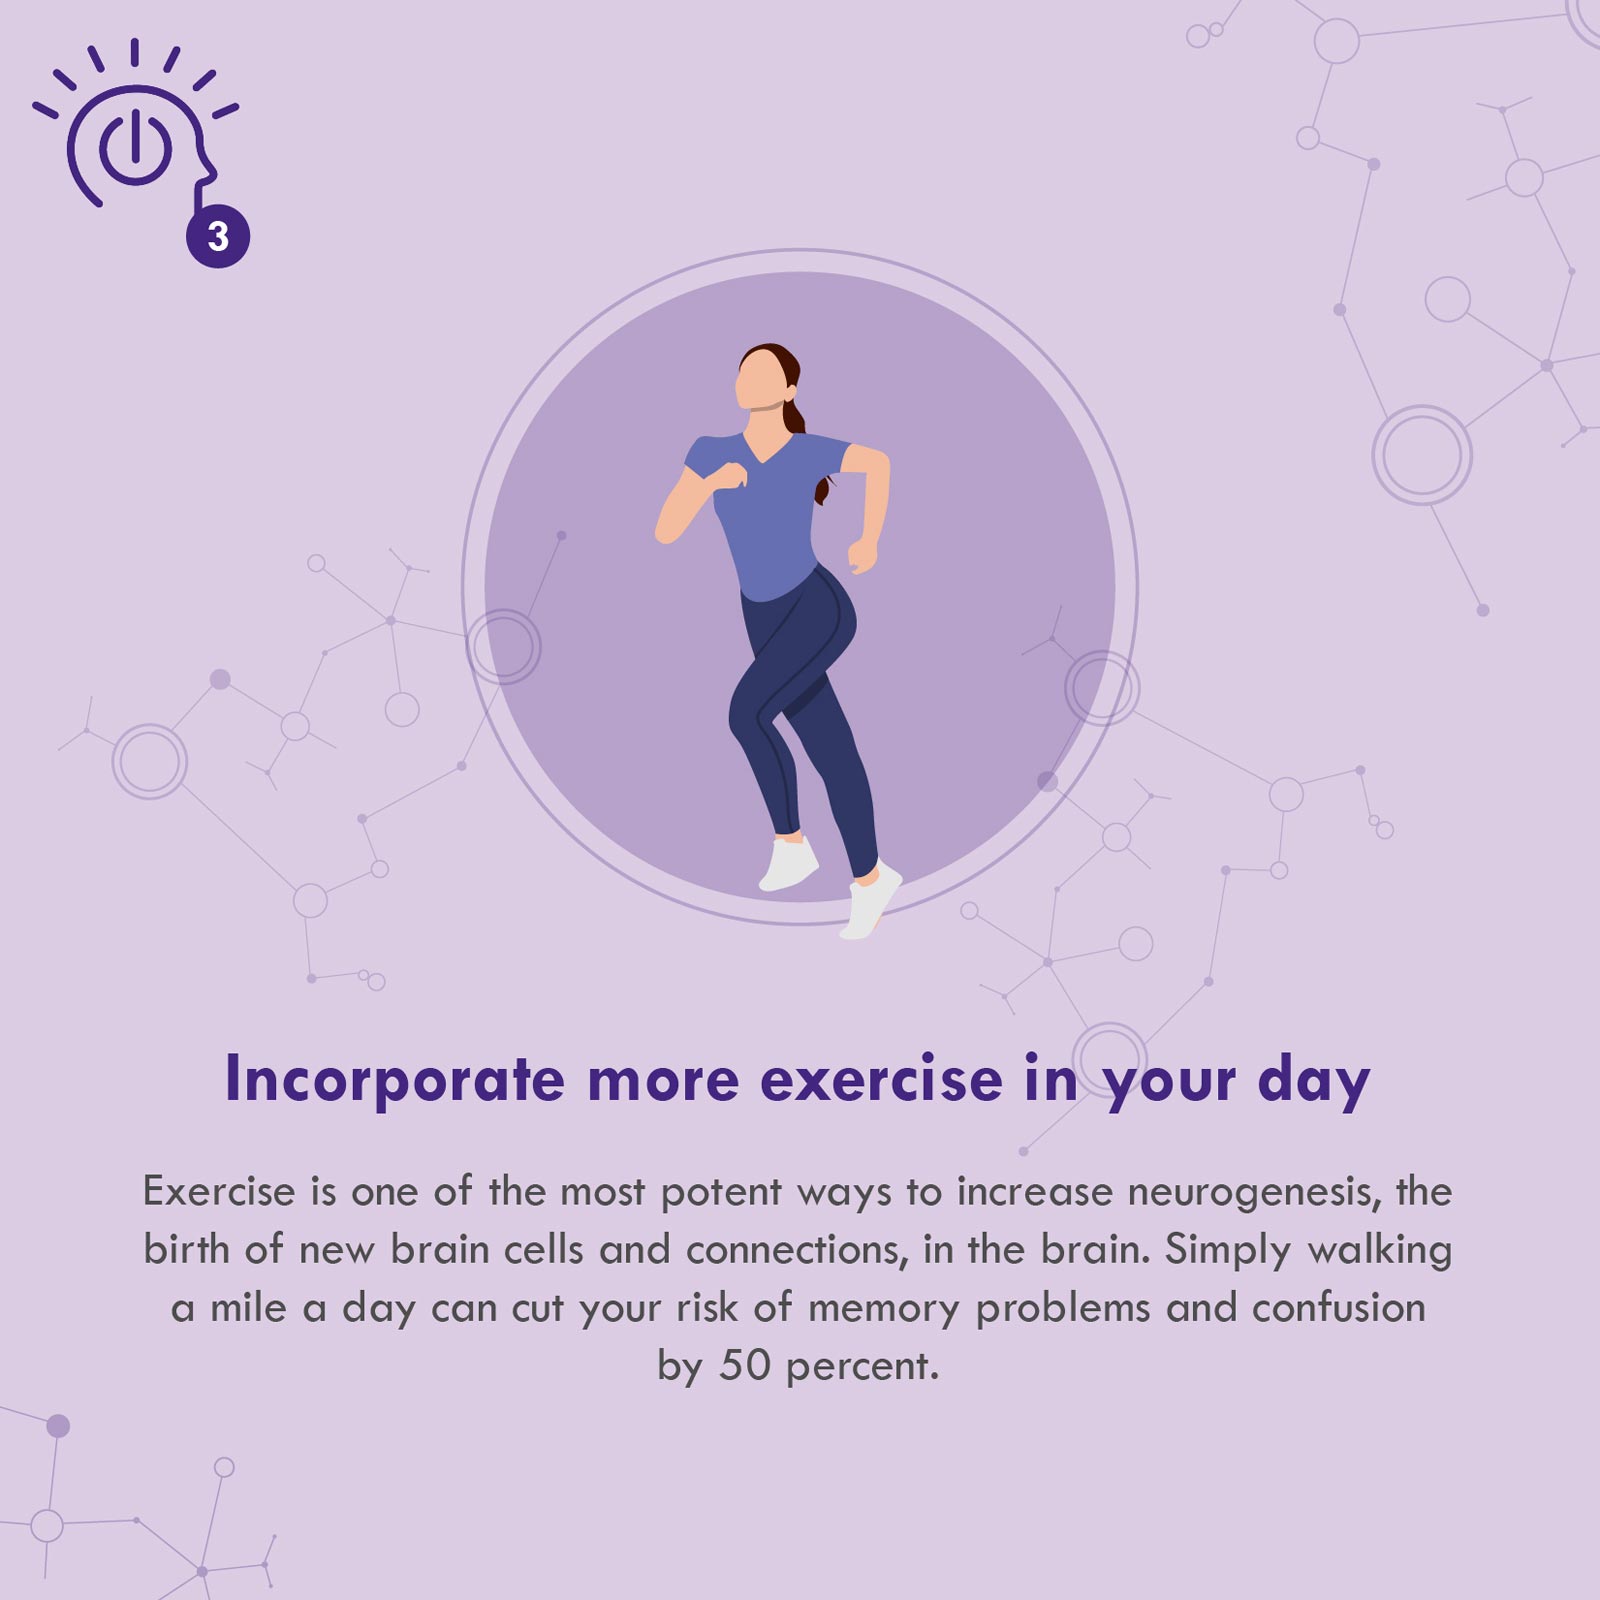 Natrol “Incorporate more exercise in your day”